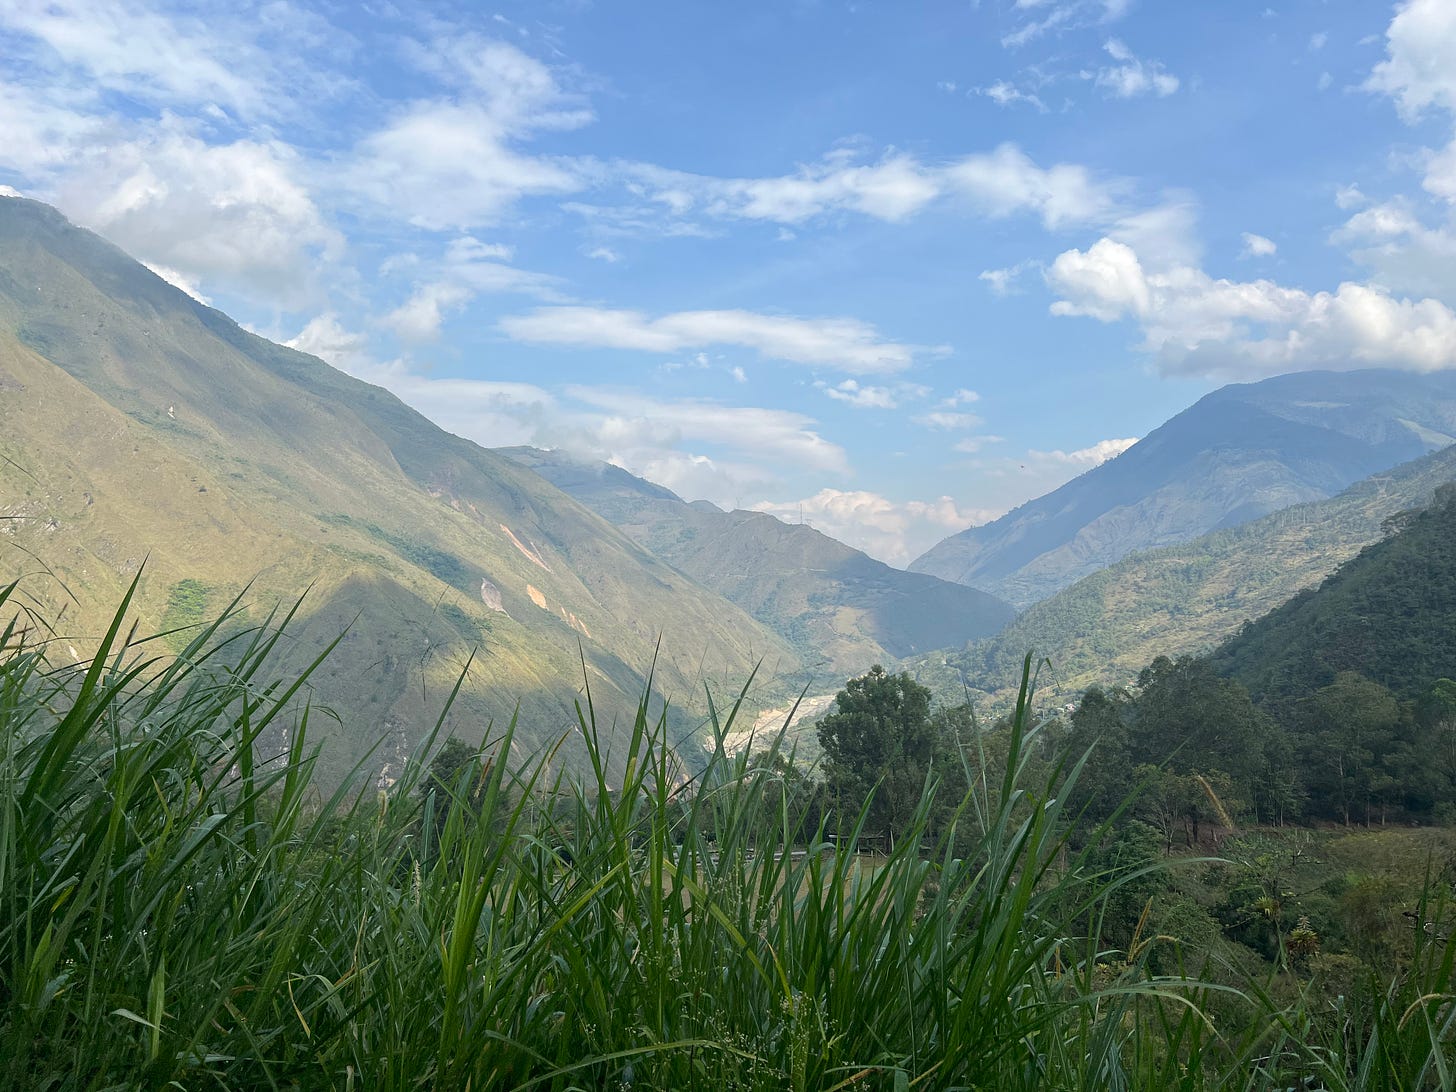 a vista of mountains with a river through them against a partly cloudy sky. there's grass in the lower quarter of the image.